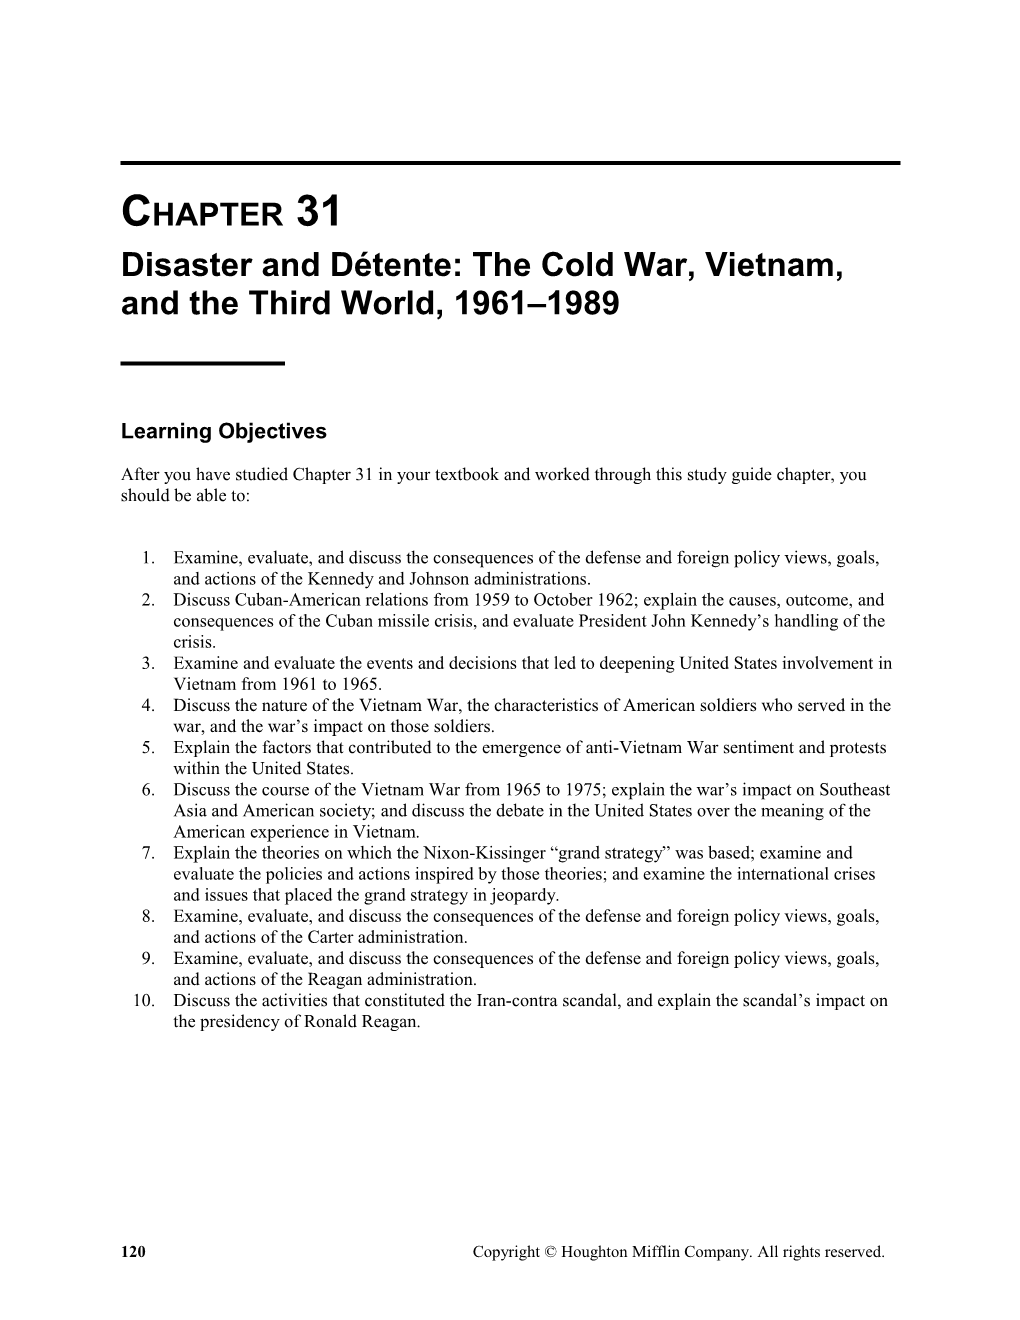 Disaster and Détente: the Cold War, Vietnam, and the Third World, 1961 19891